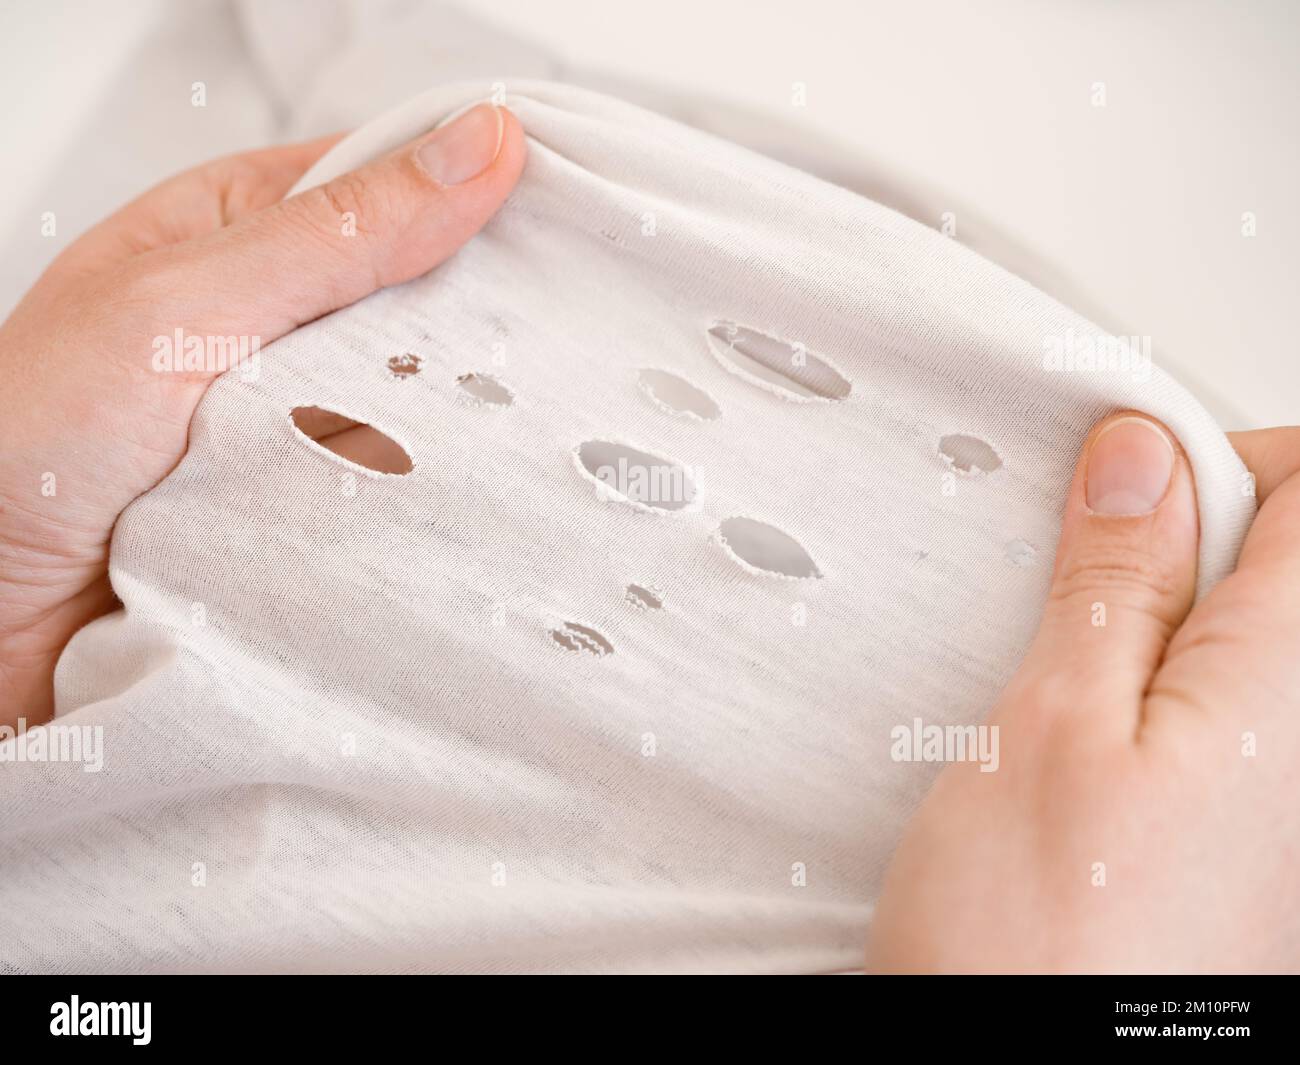 A woman stretching a shirt with holes. Close up. Stock Photo